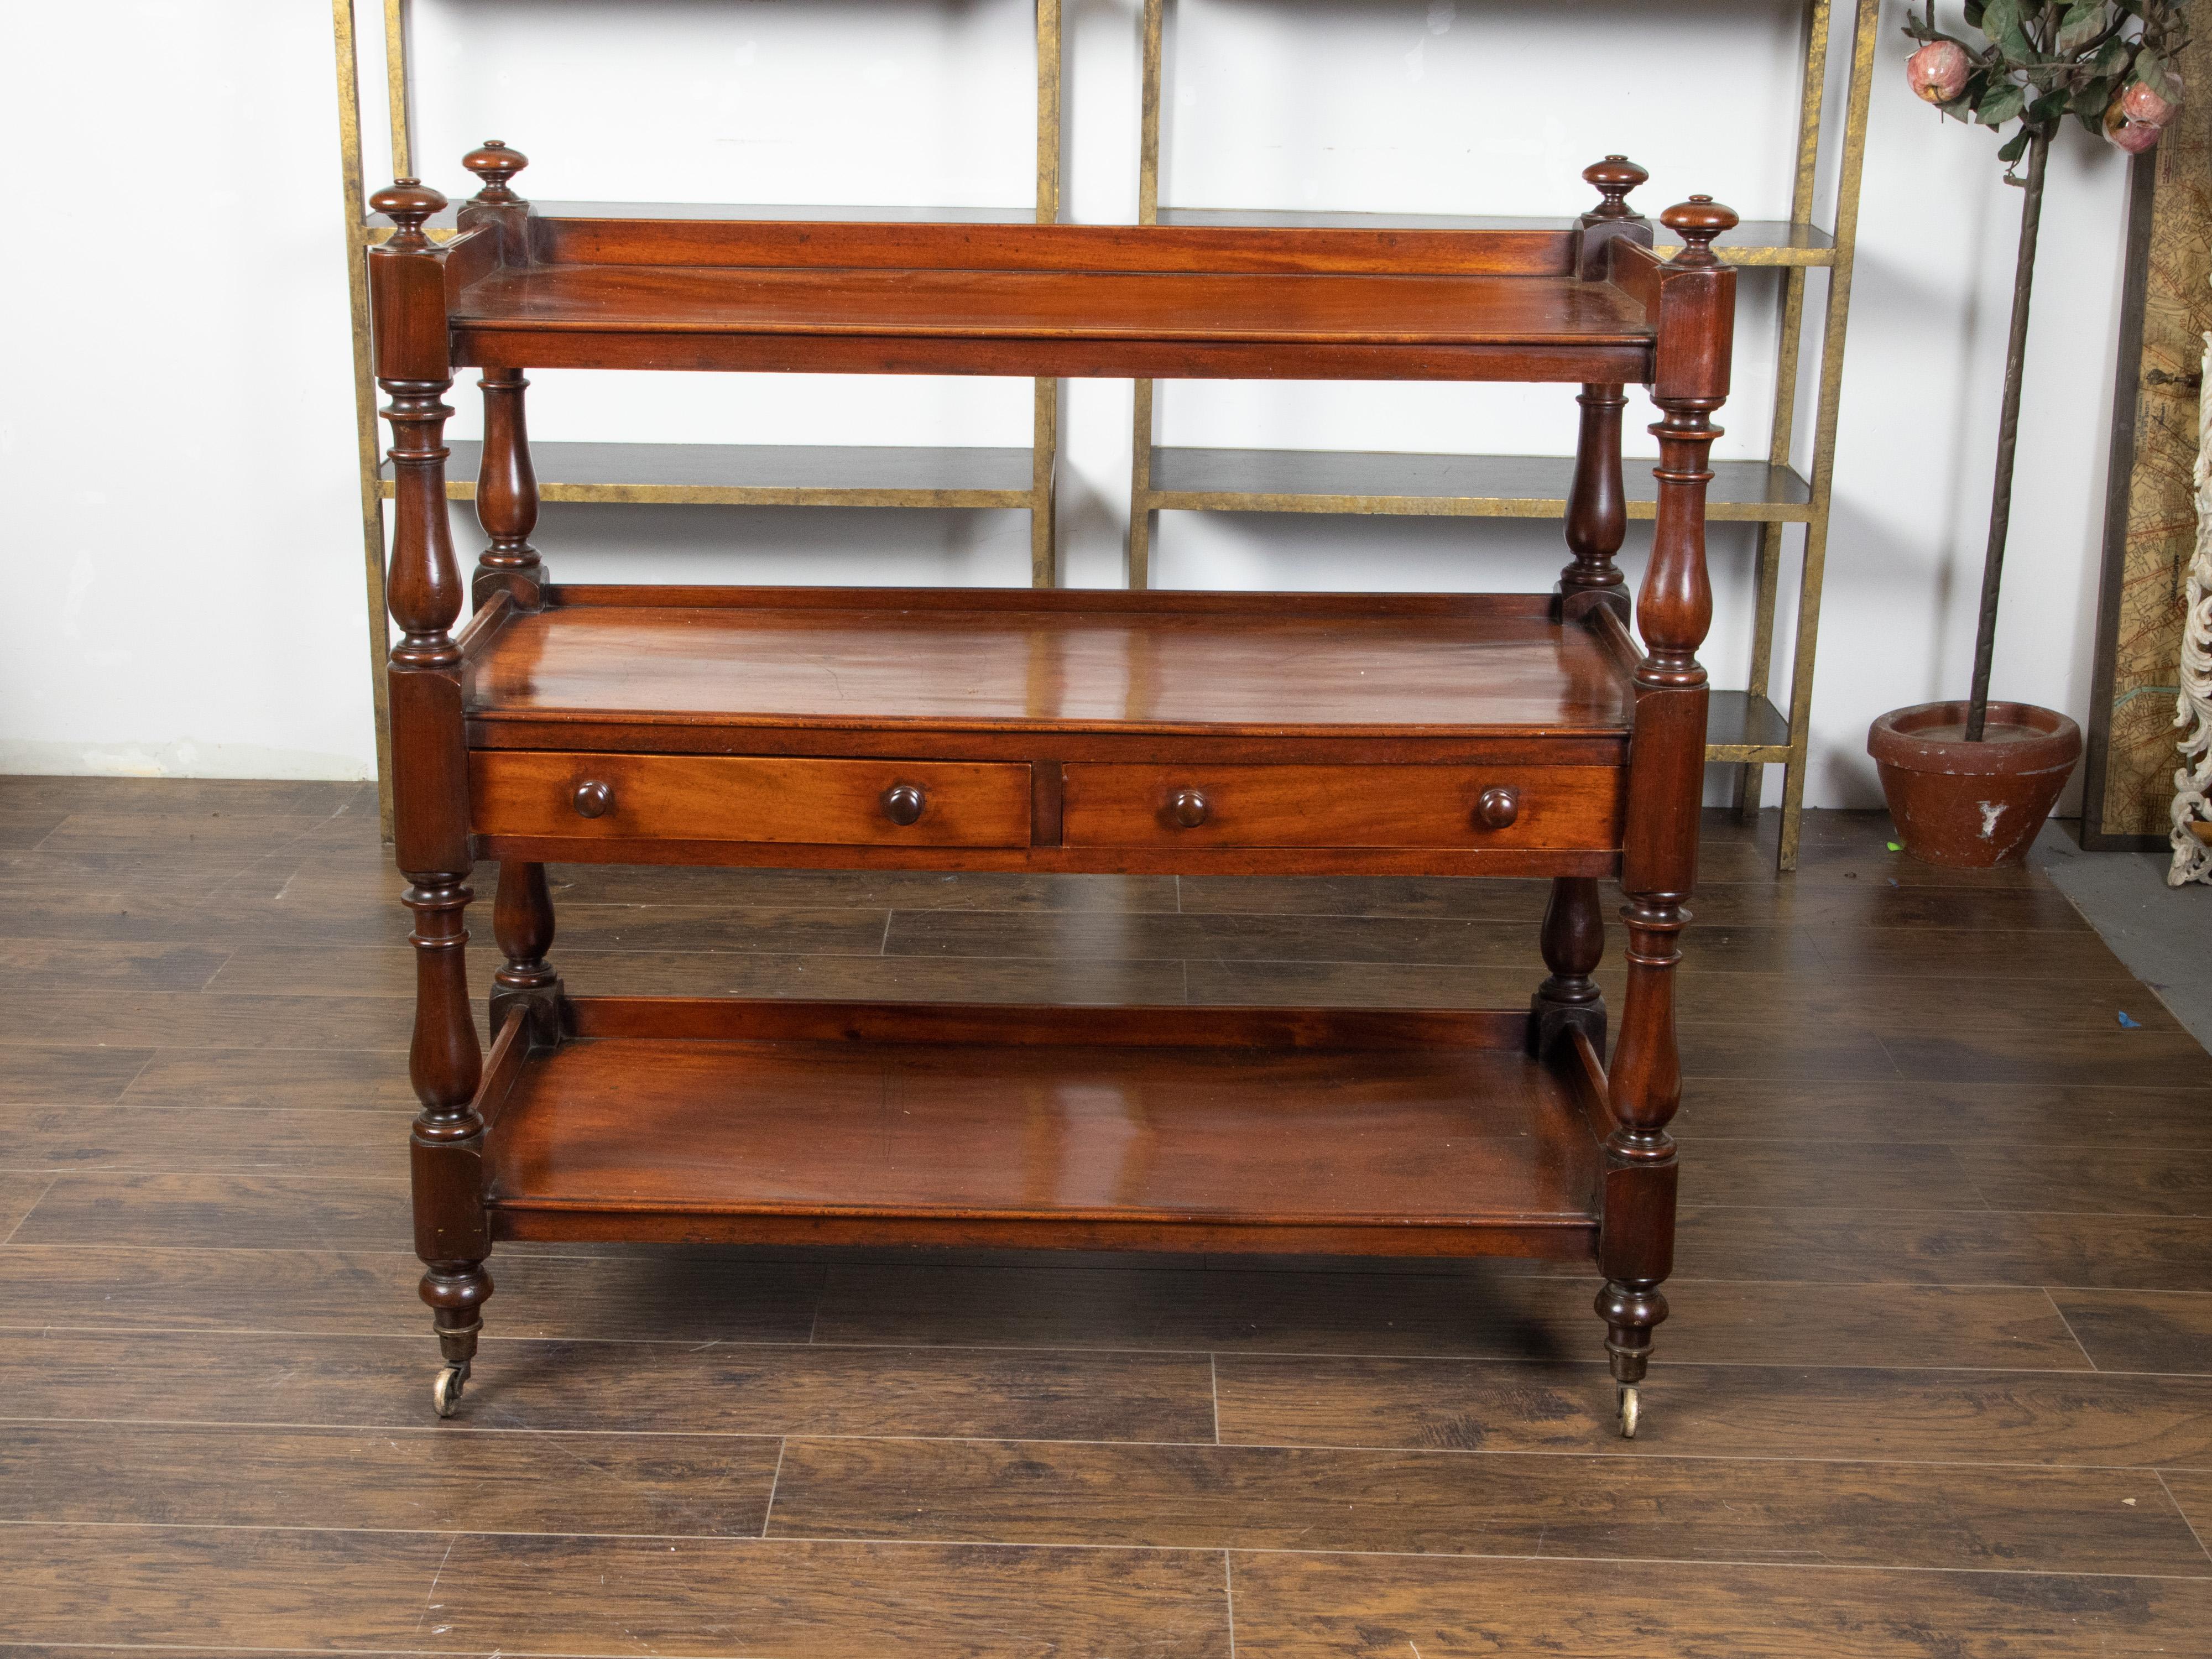 An English mahogany trolley from the early 19th century, with two drawers and brass casters. Created in England during the first quarter of the 19th century, this mahogany trolley features an upper shelf surrounded by a three-quarter gallery